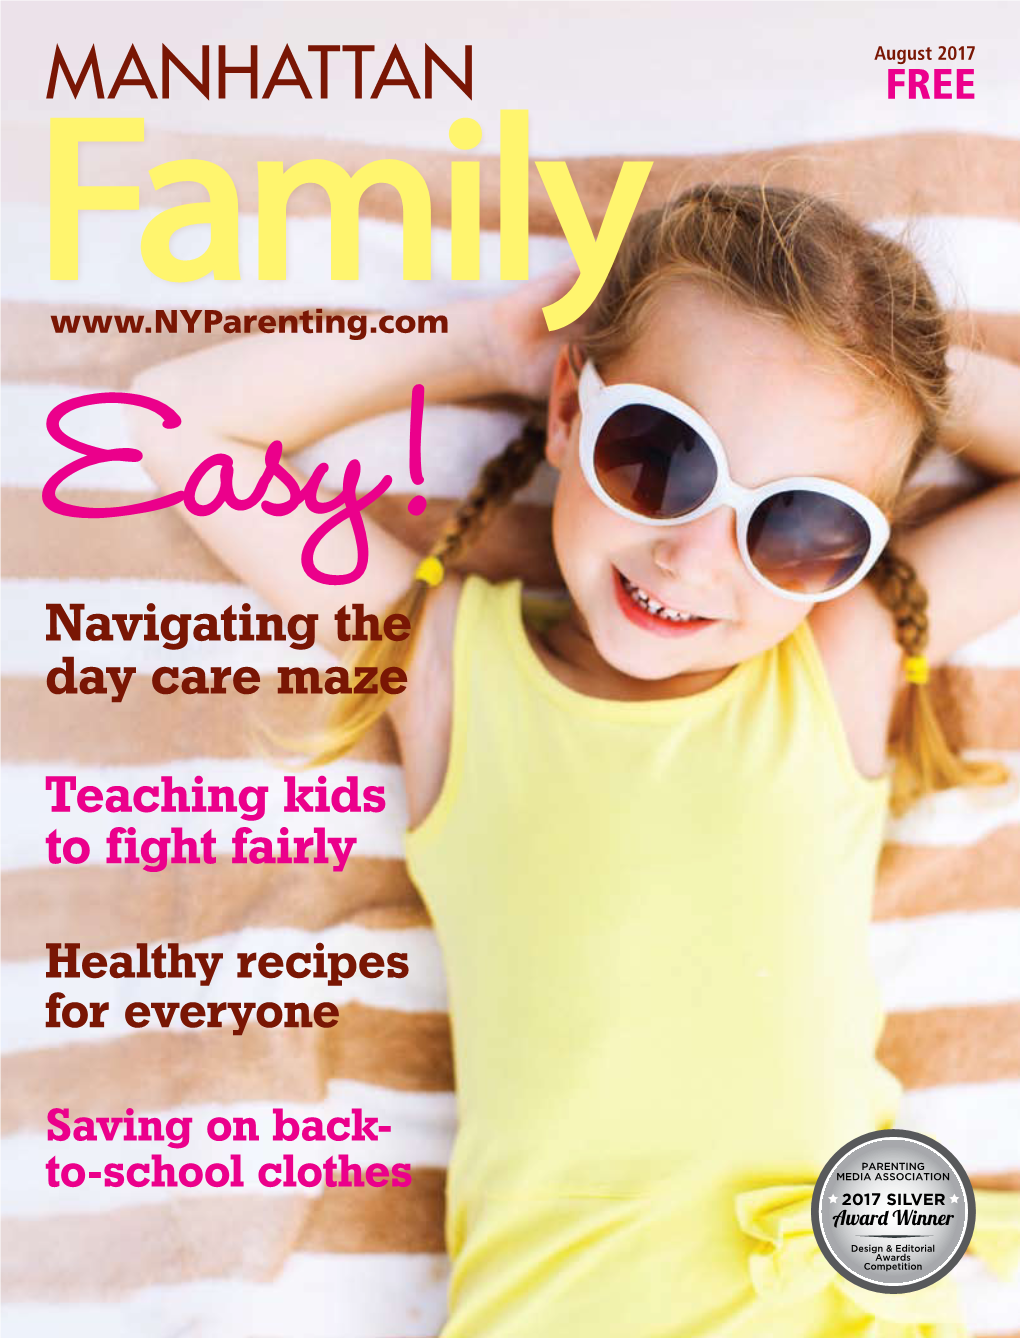 Manhattan FREE Family Easy! Navigating the Day Care Maze